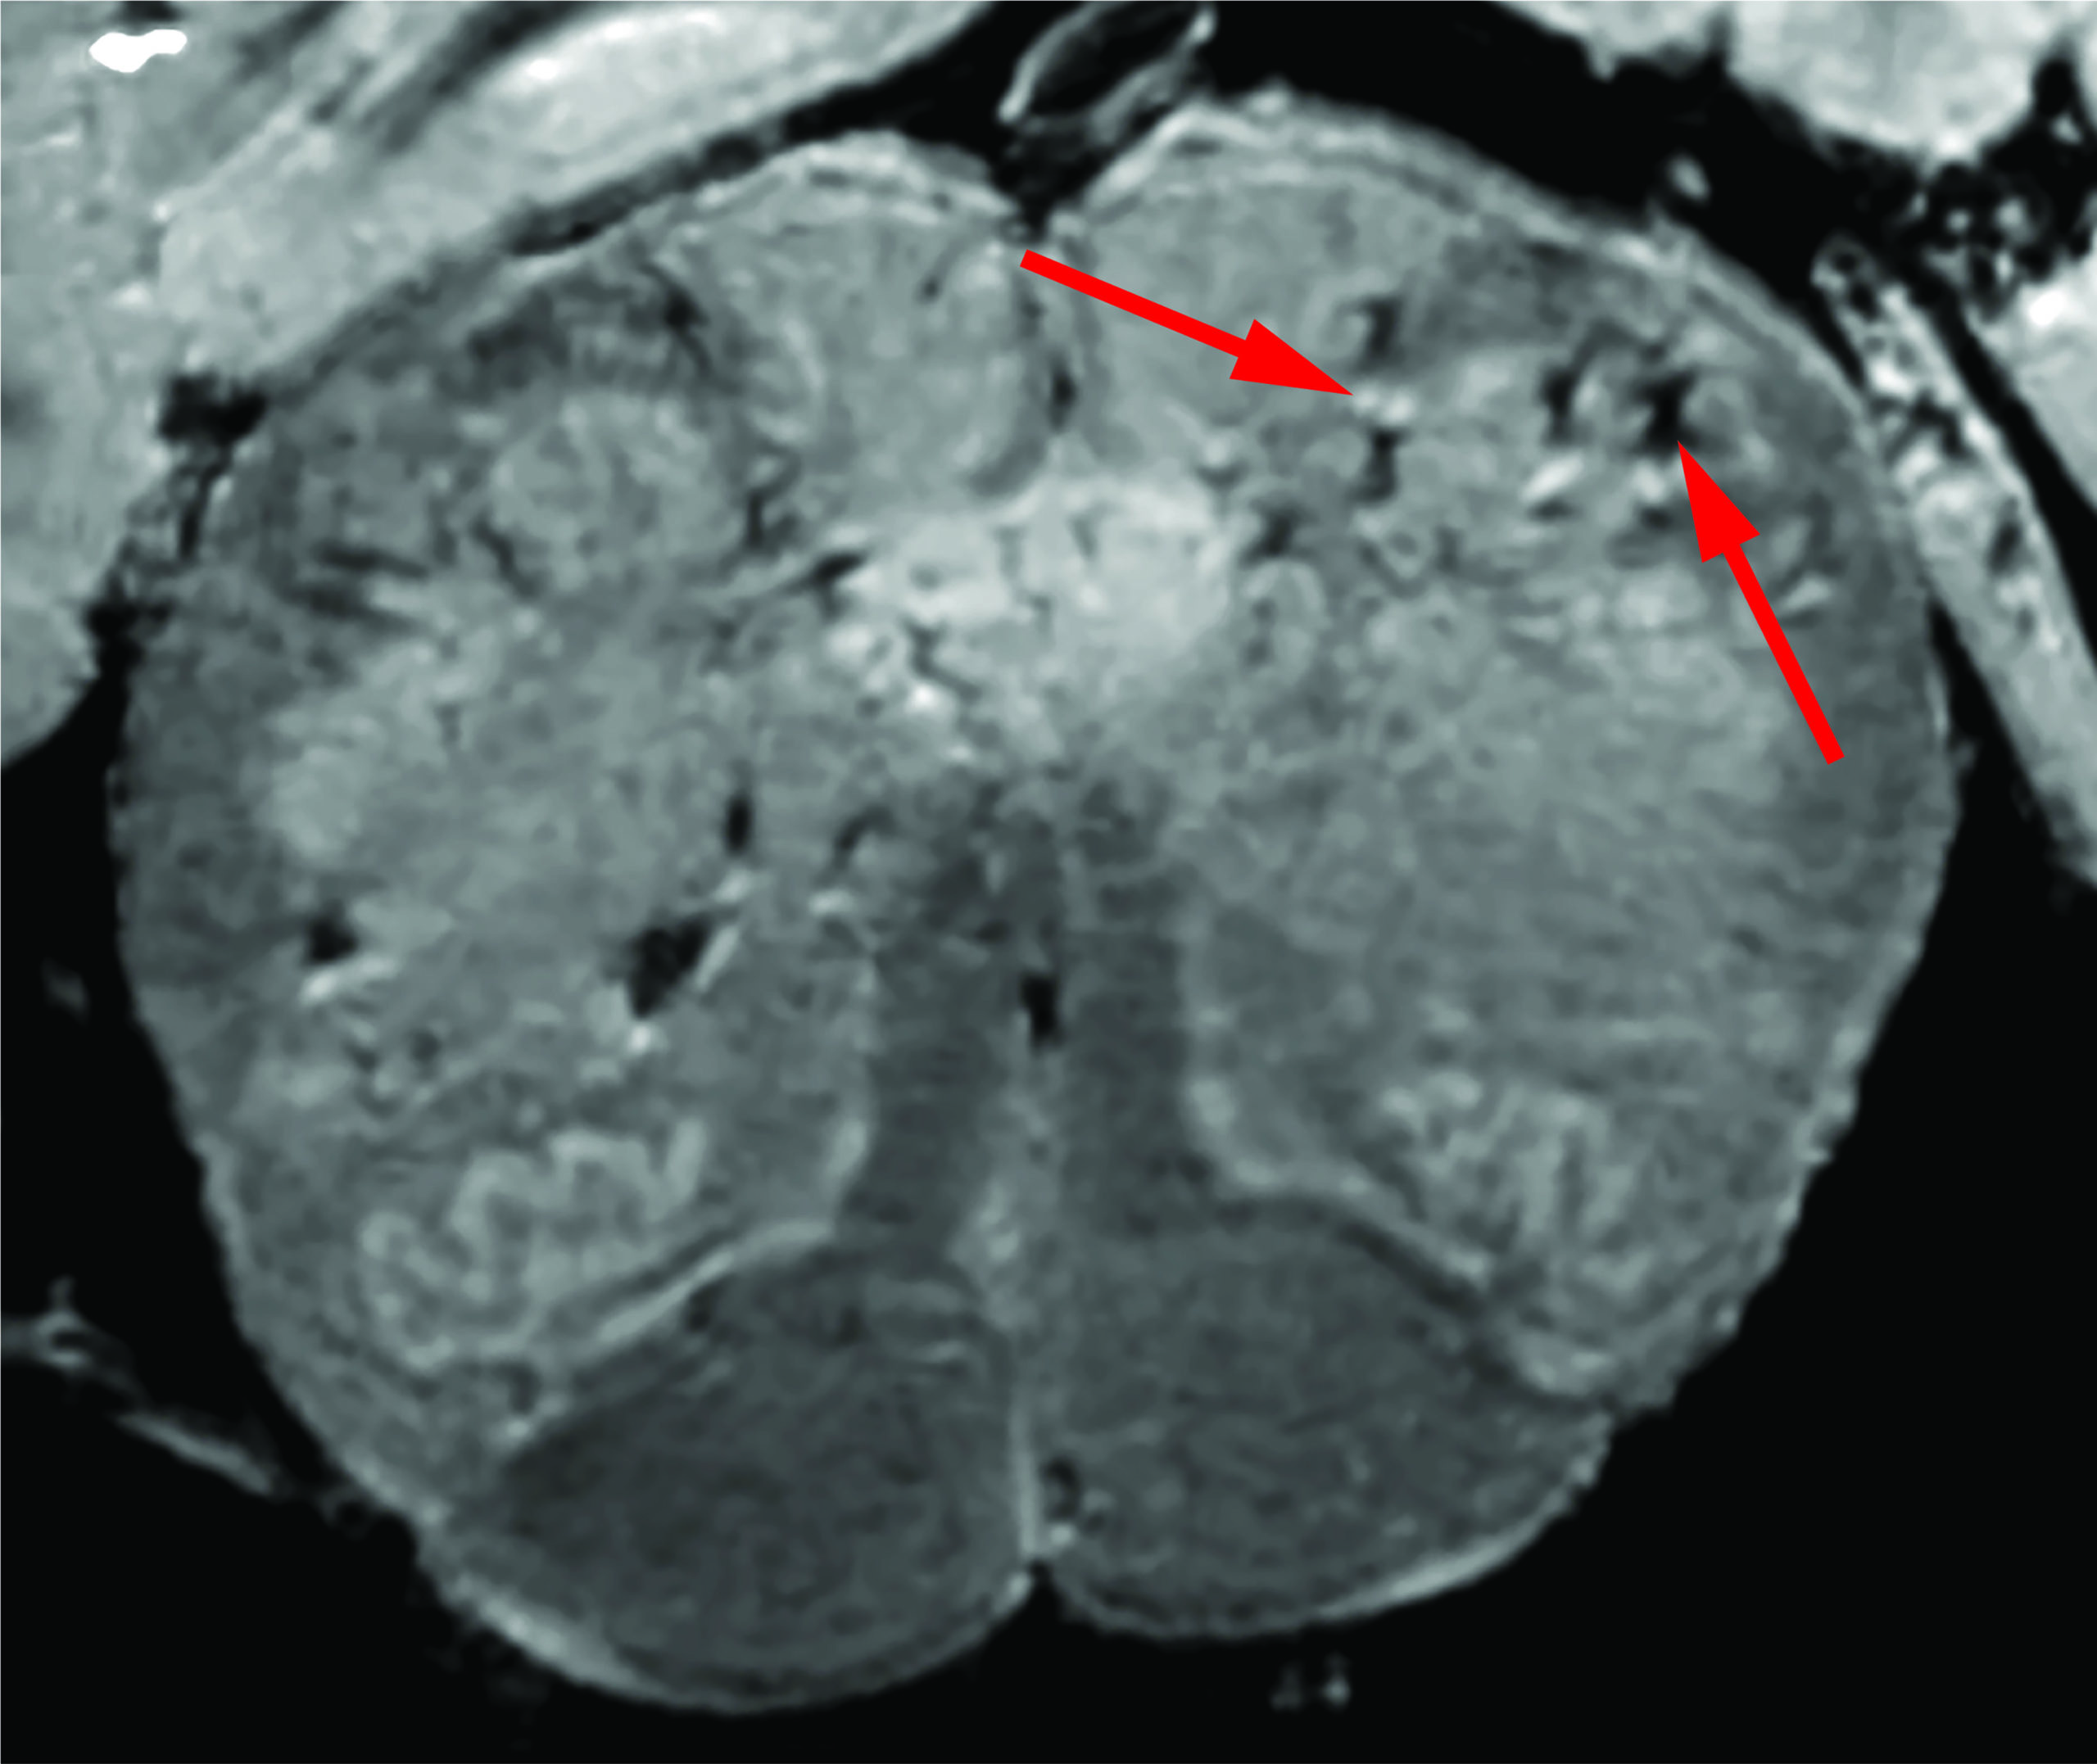 A high-resolution scan of a covid-19 patient's brain stem. The arrows point to light and dark spots that suggest blood vessel damage. (Image: Courtesy of NIH/NINDS)